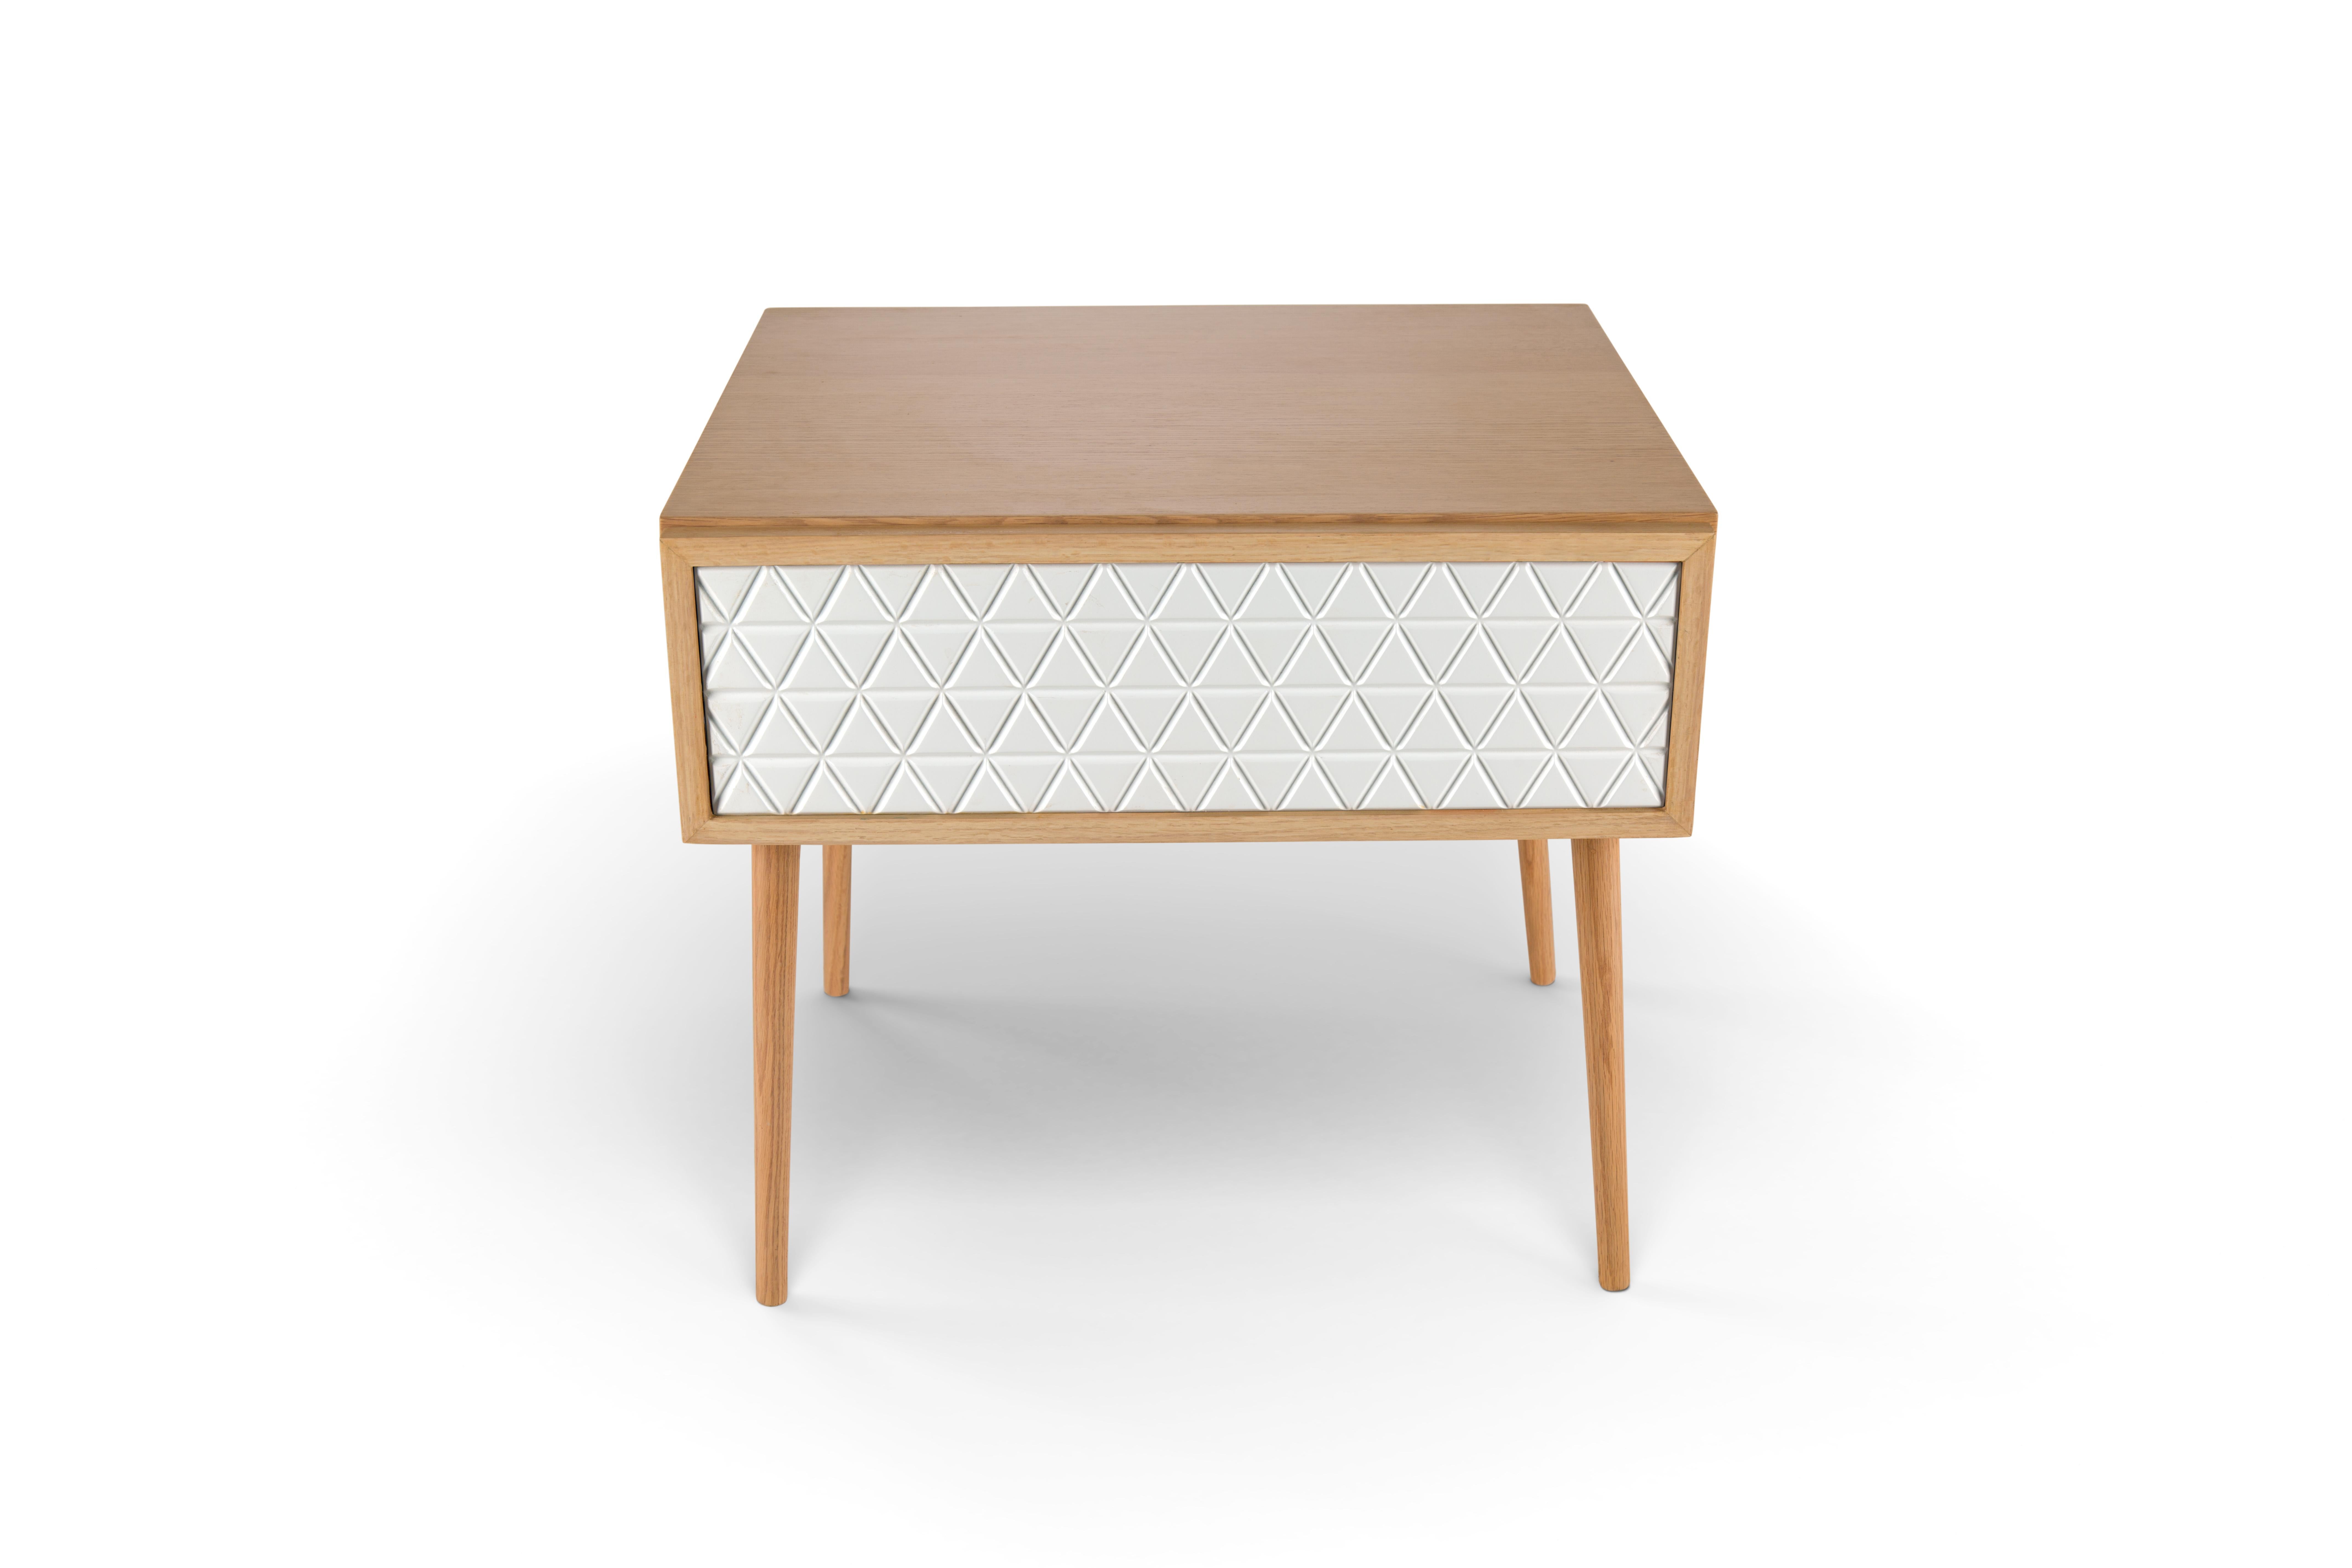 Wide oak wood nightstand with hand-crafted white lacquered drawer.
Our White Medley nightstand's body is made from Oak wood with a lacquered drawer hand-crafted with an intricate geometric design. The wide length is designed to allow ample space